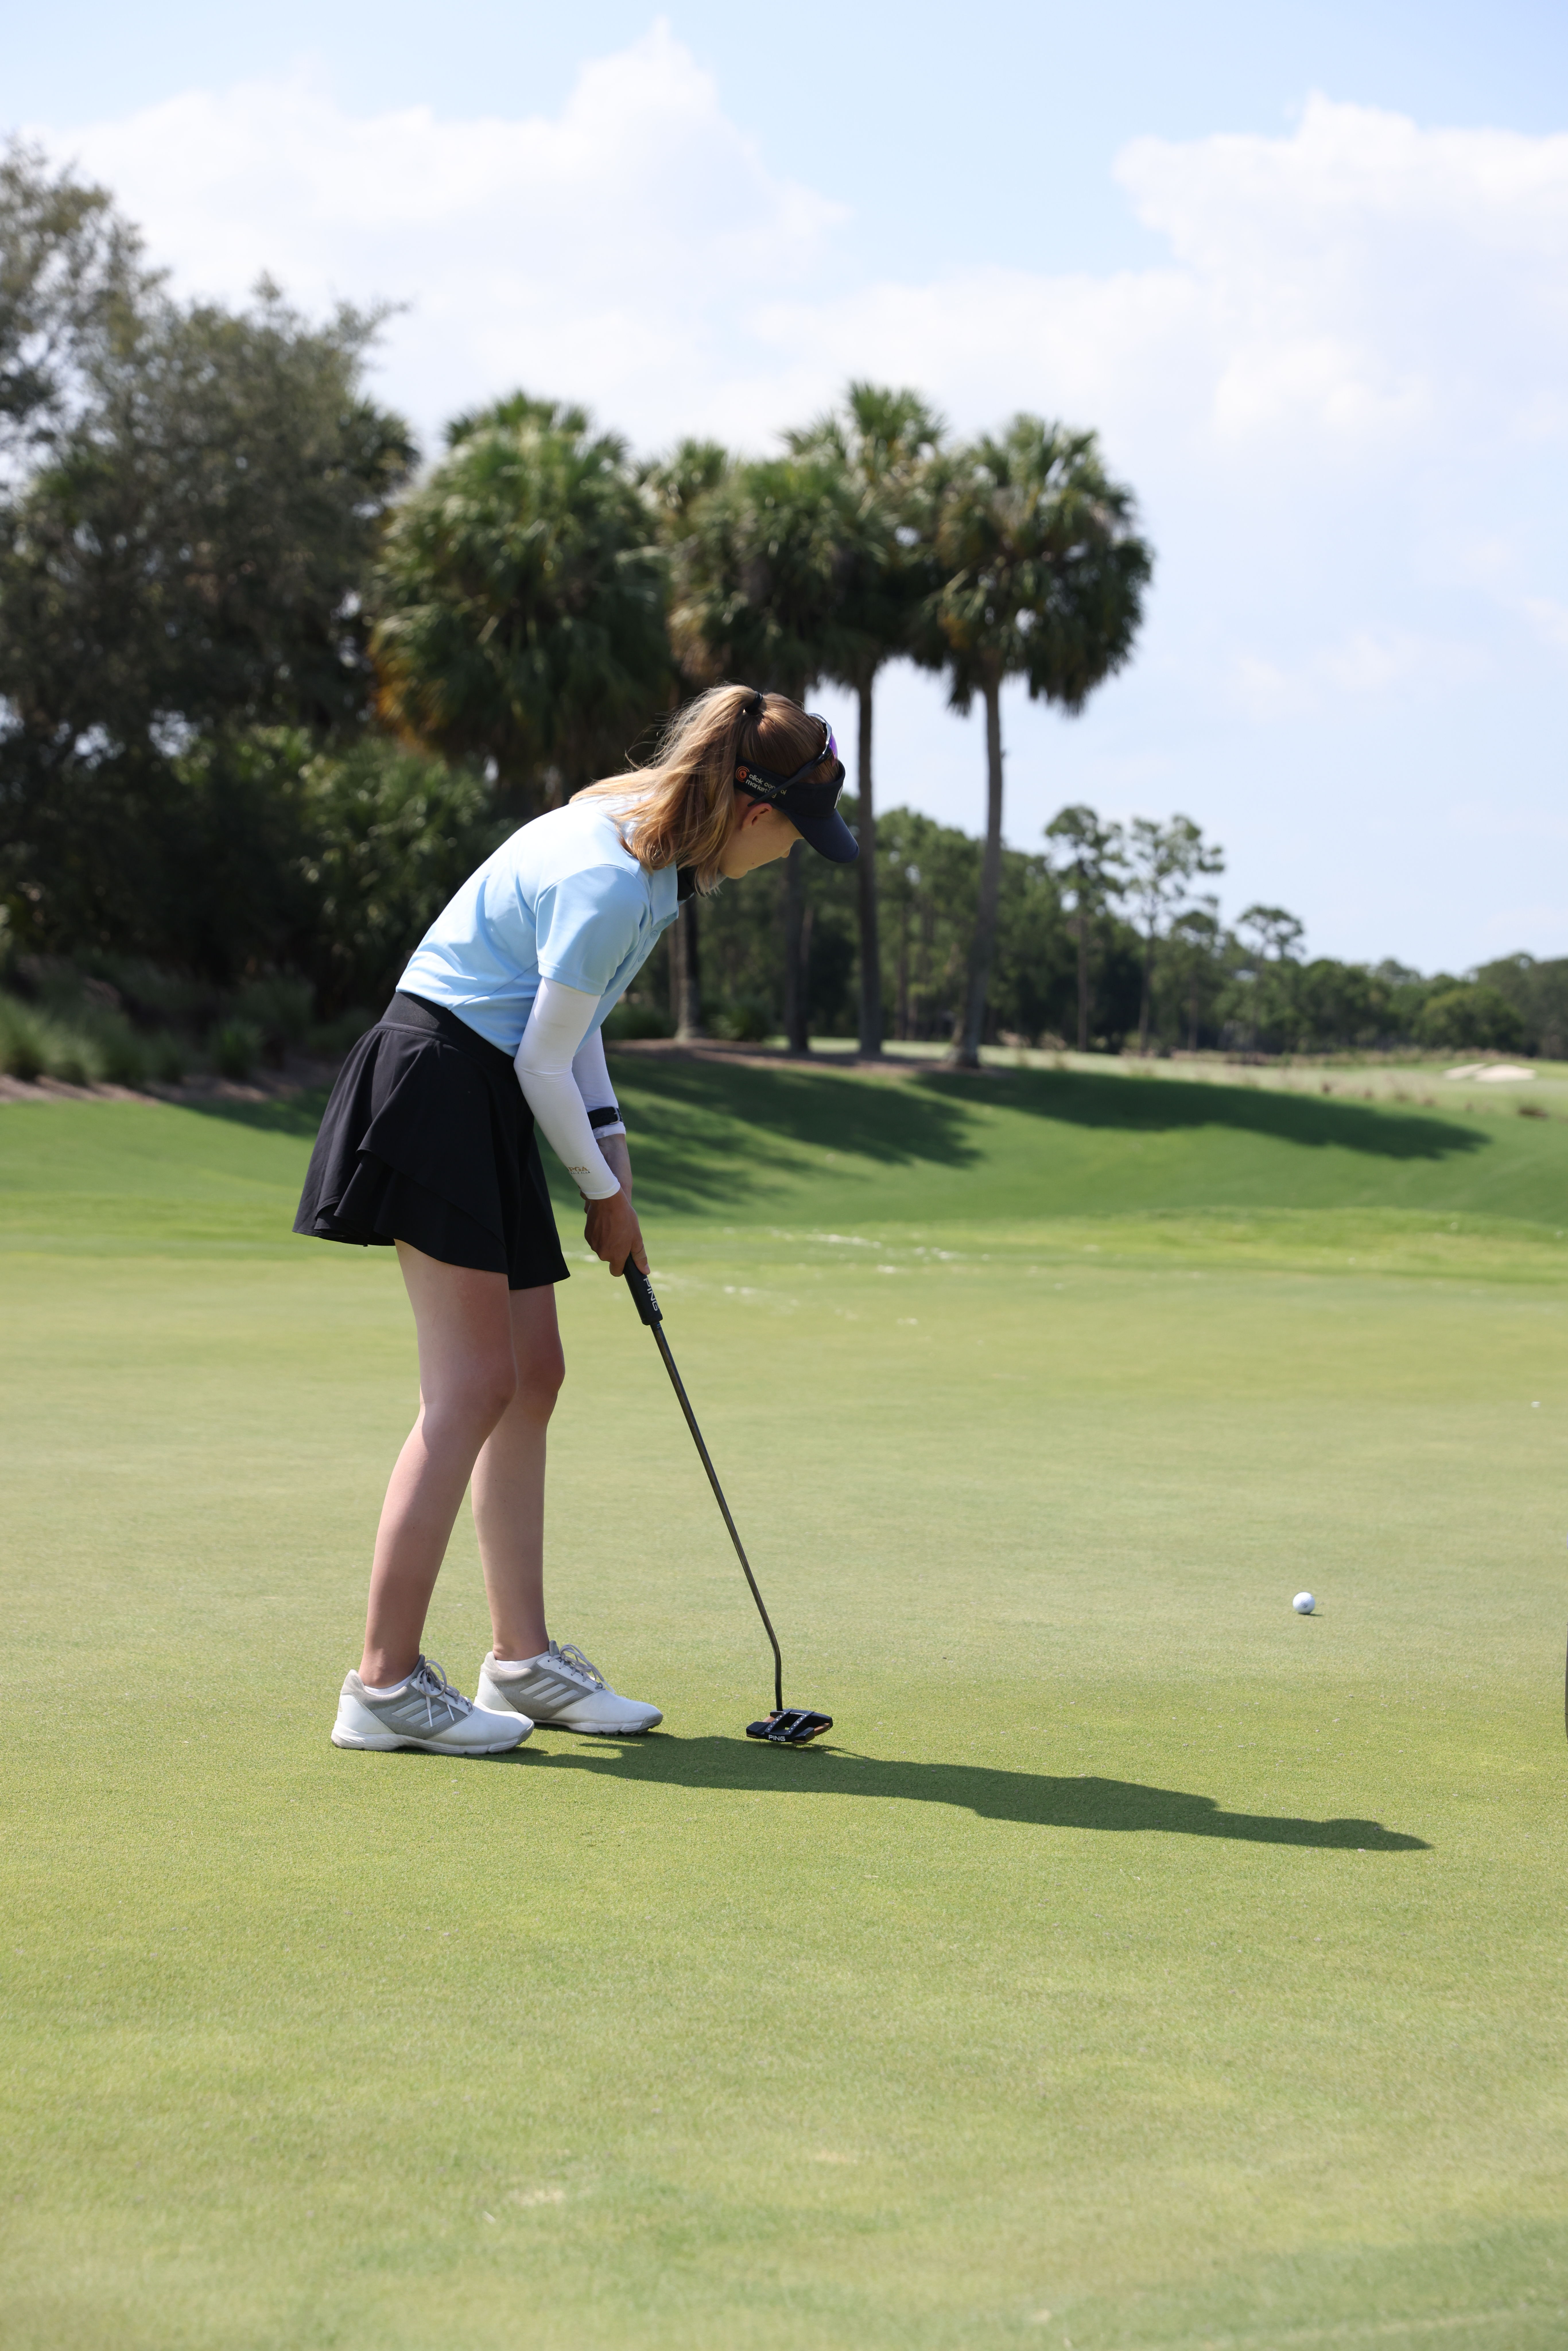 Bish putting during the final round of the U.S. Disabled Open.